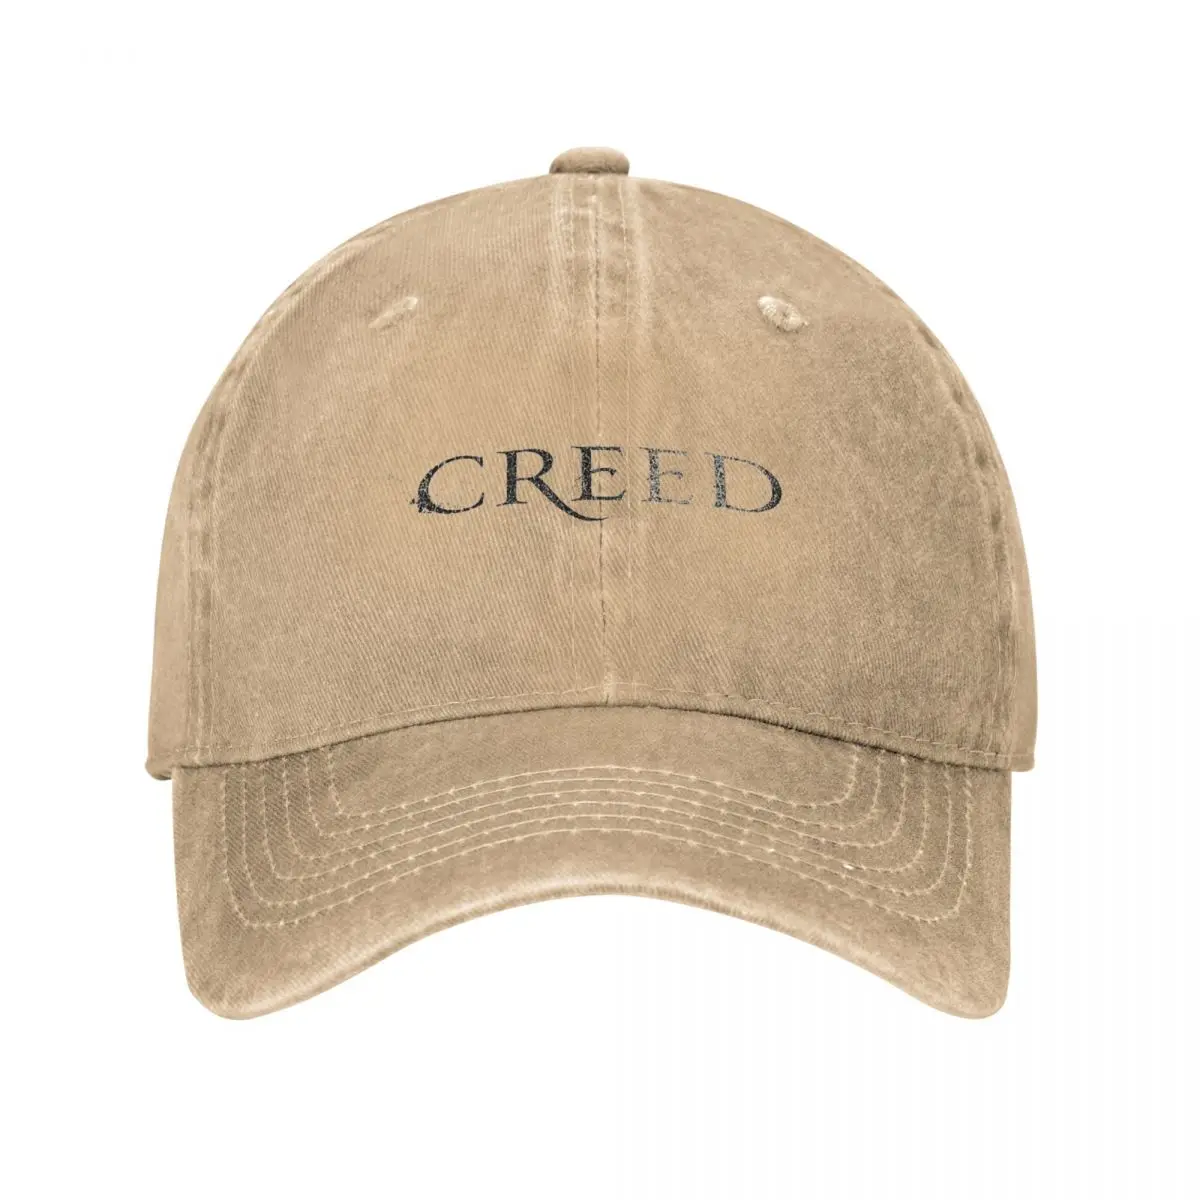 

Vintage Creed Band Logo Outfit Men Women Baseball Caps Album 90s Distressed Denim Washed Hats Cap Outdoor Workouts Soft Headwear